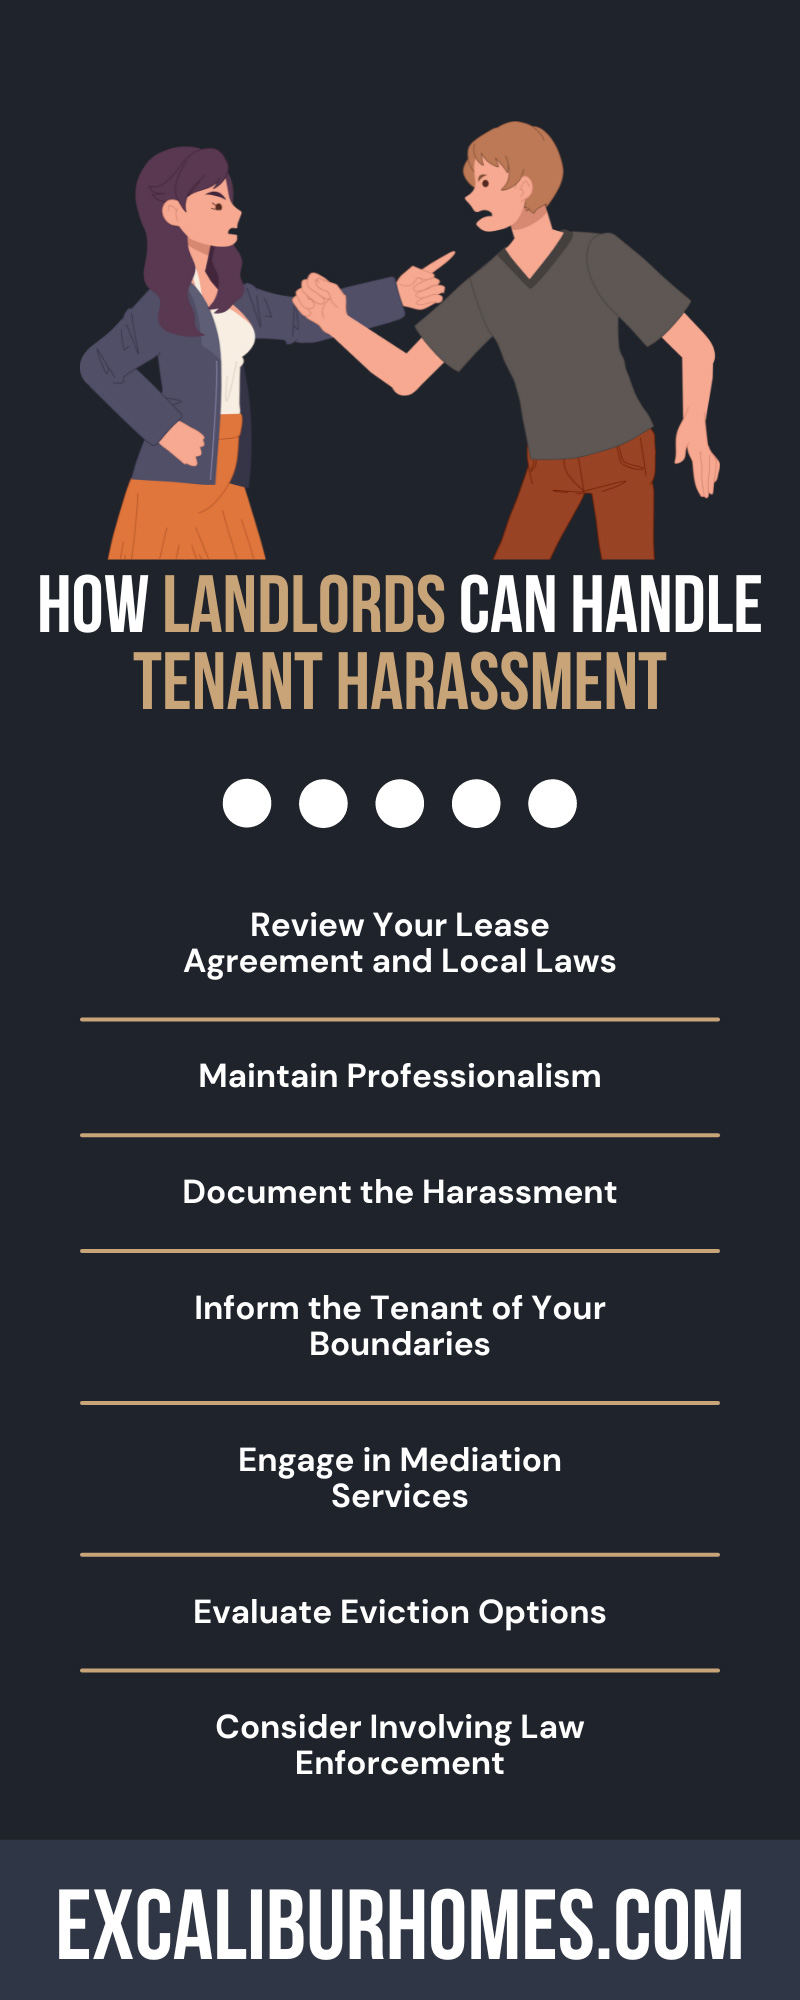 How Landlords Can Handle Tenant Harassment